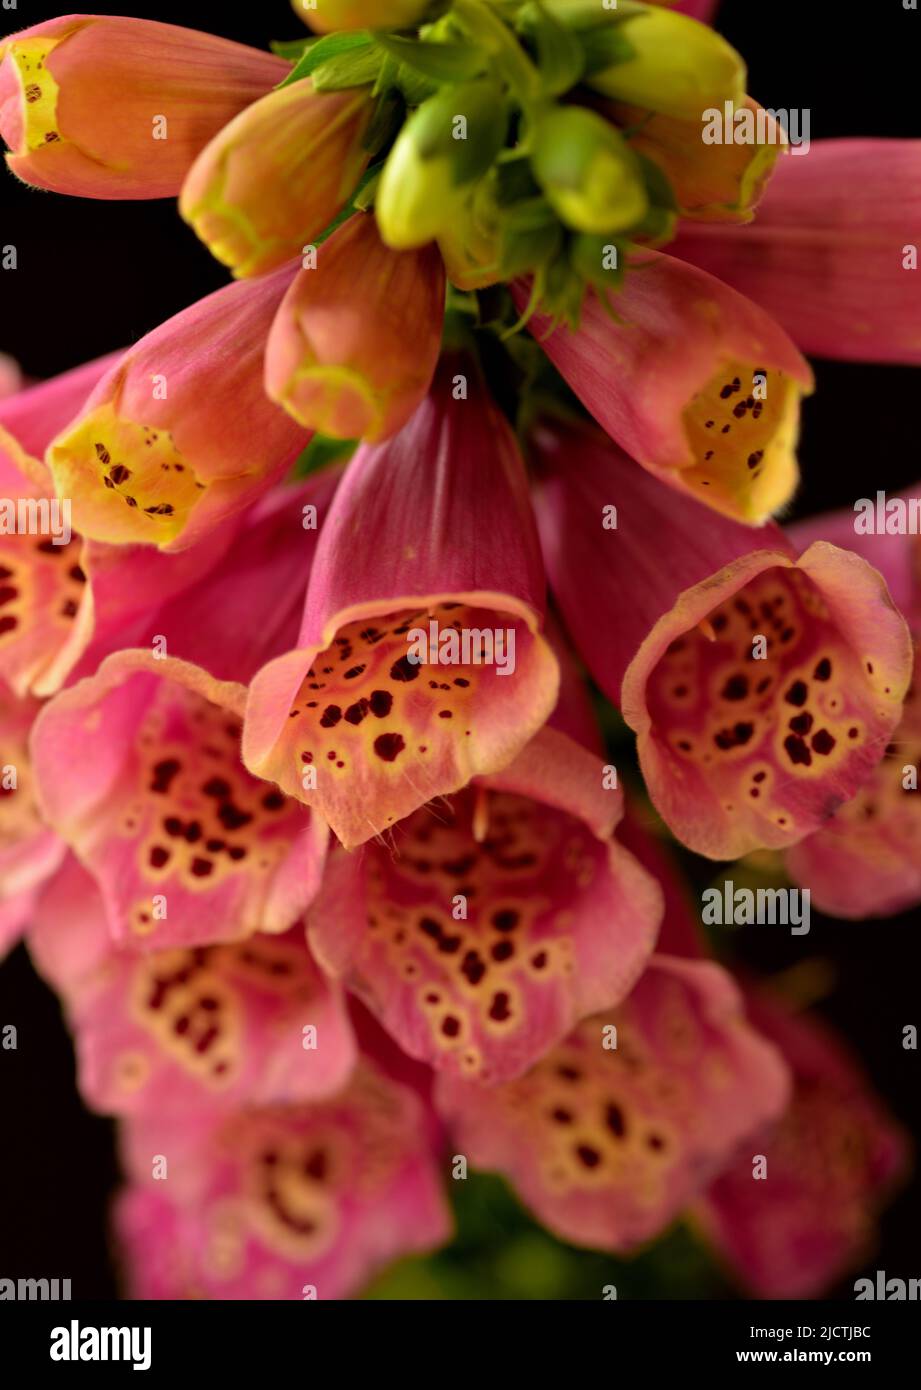 Image of foxglove (Digitalis purpurea) pink blooms and buds against a black background. Stock Photo